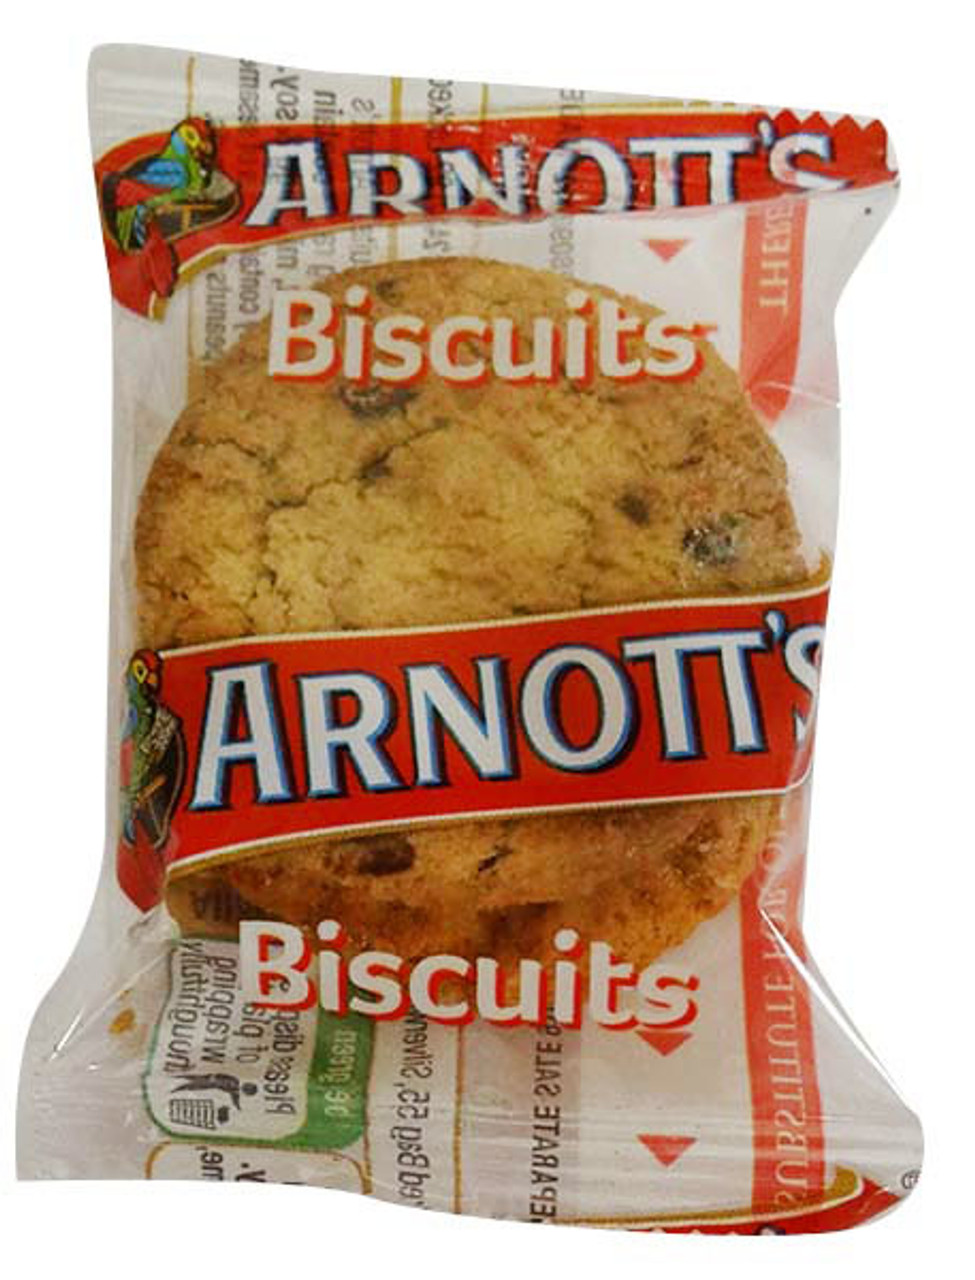 Arnotts Butternut Snap And Farmhouse Choc Chip And Other Snack Foods At Australias Cheapest Prices Are Ready To Purchase At The Professors Online Lolly Shop With The Sku 10629